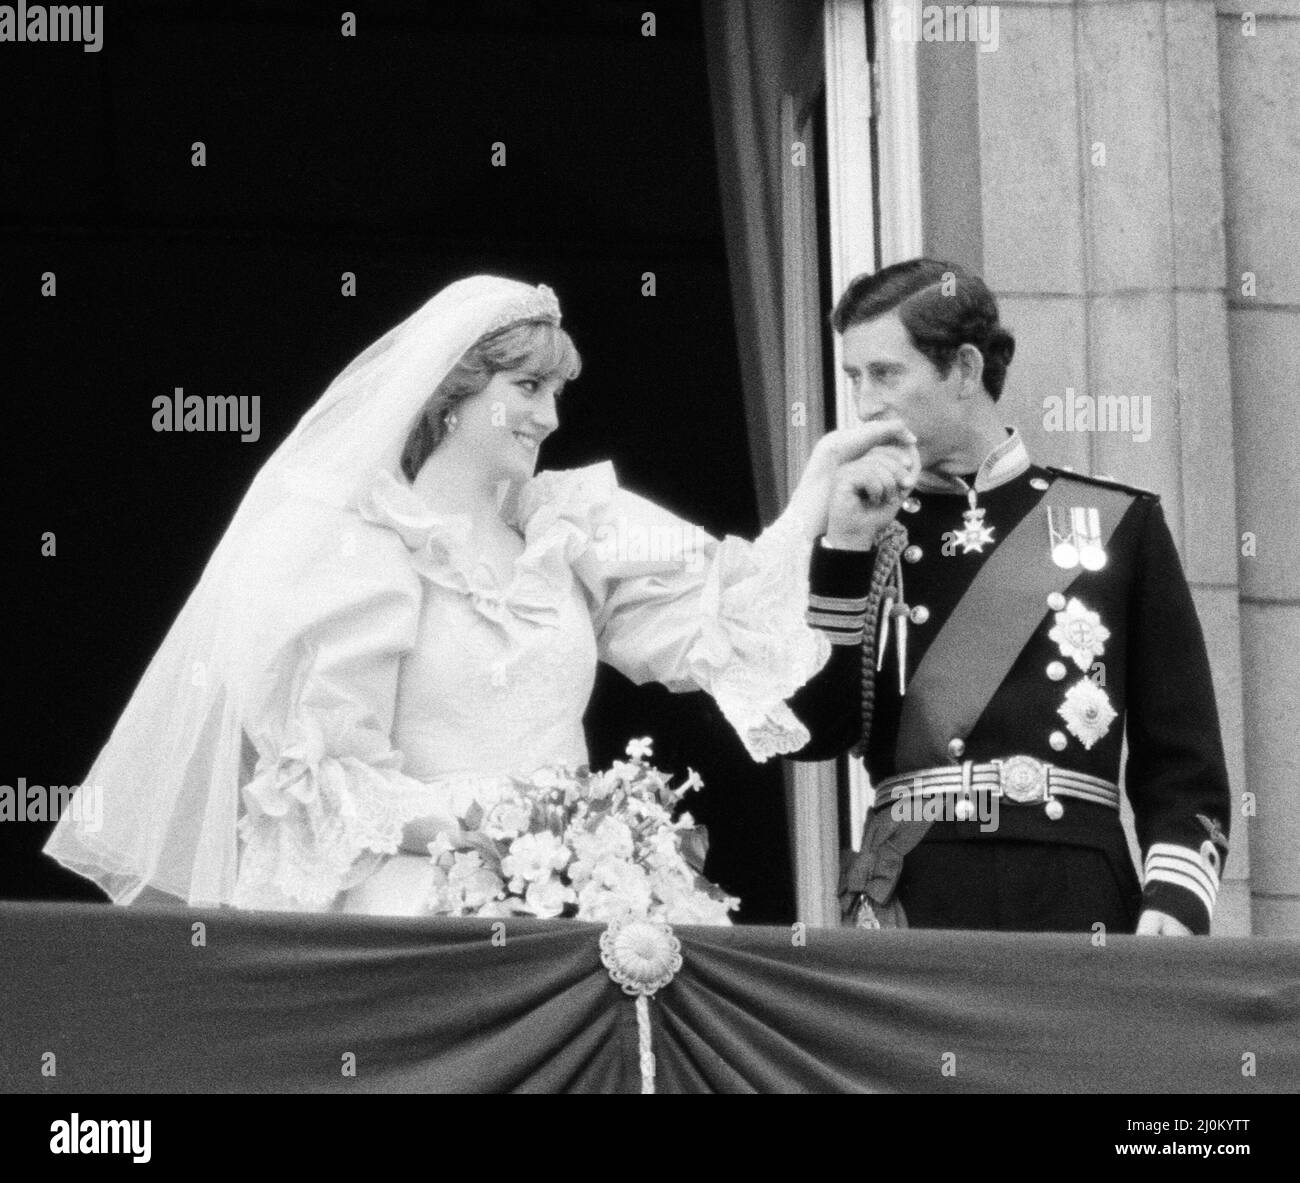 **CROPPED VERSION - ORIGINAL WIDE FRAME ALSO IN THIS SET*** Prince Charles kissed the hand of his bride, Lady Diana Spencer.  Picture taken of the happy couple on the balcony at Buckingham Palace after the wedding ceremony.  Picture taken 29th July 1981. Stock Photo